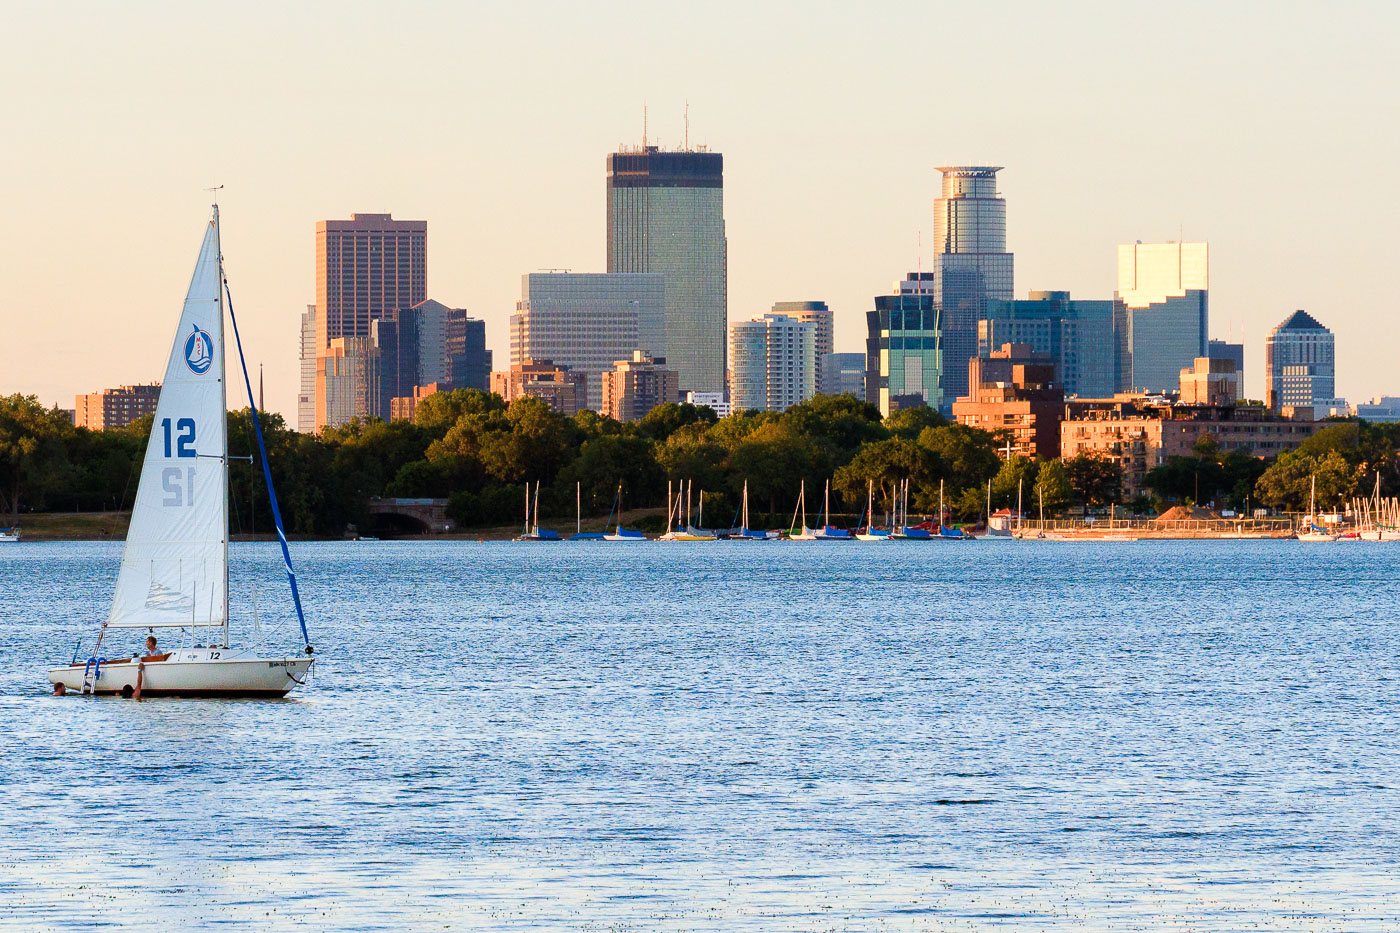 City skyline with a sail boat in the water